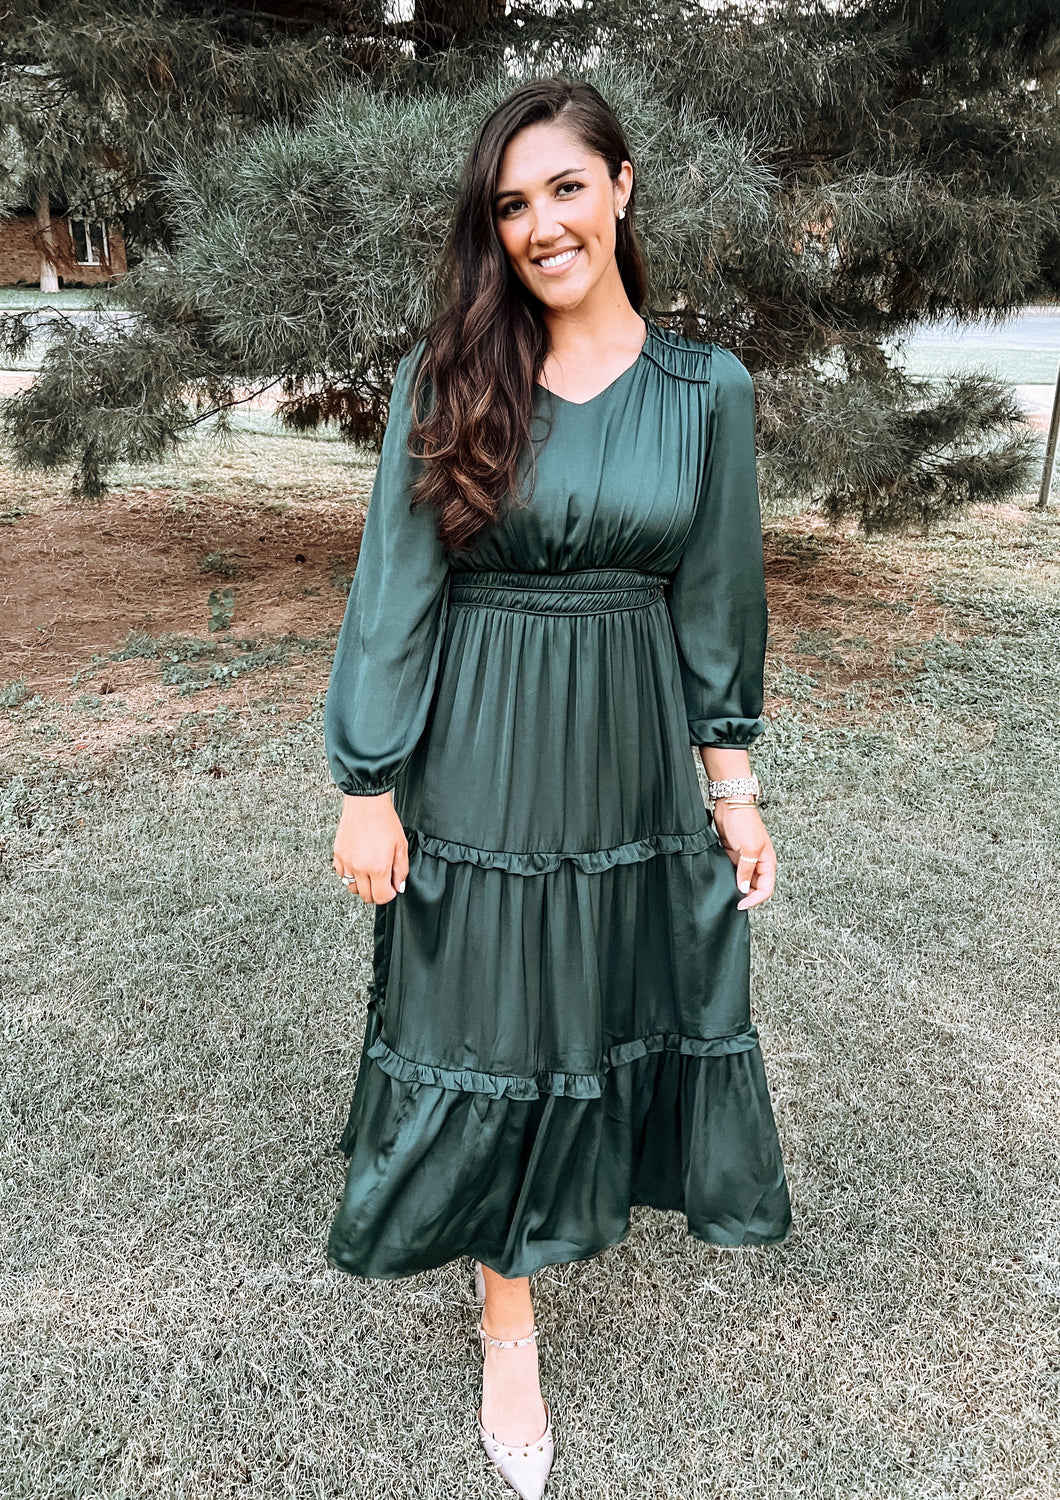 Emily Emerald Tiered Dress